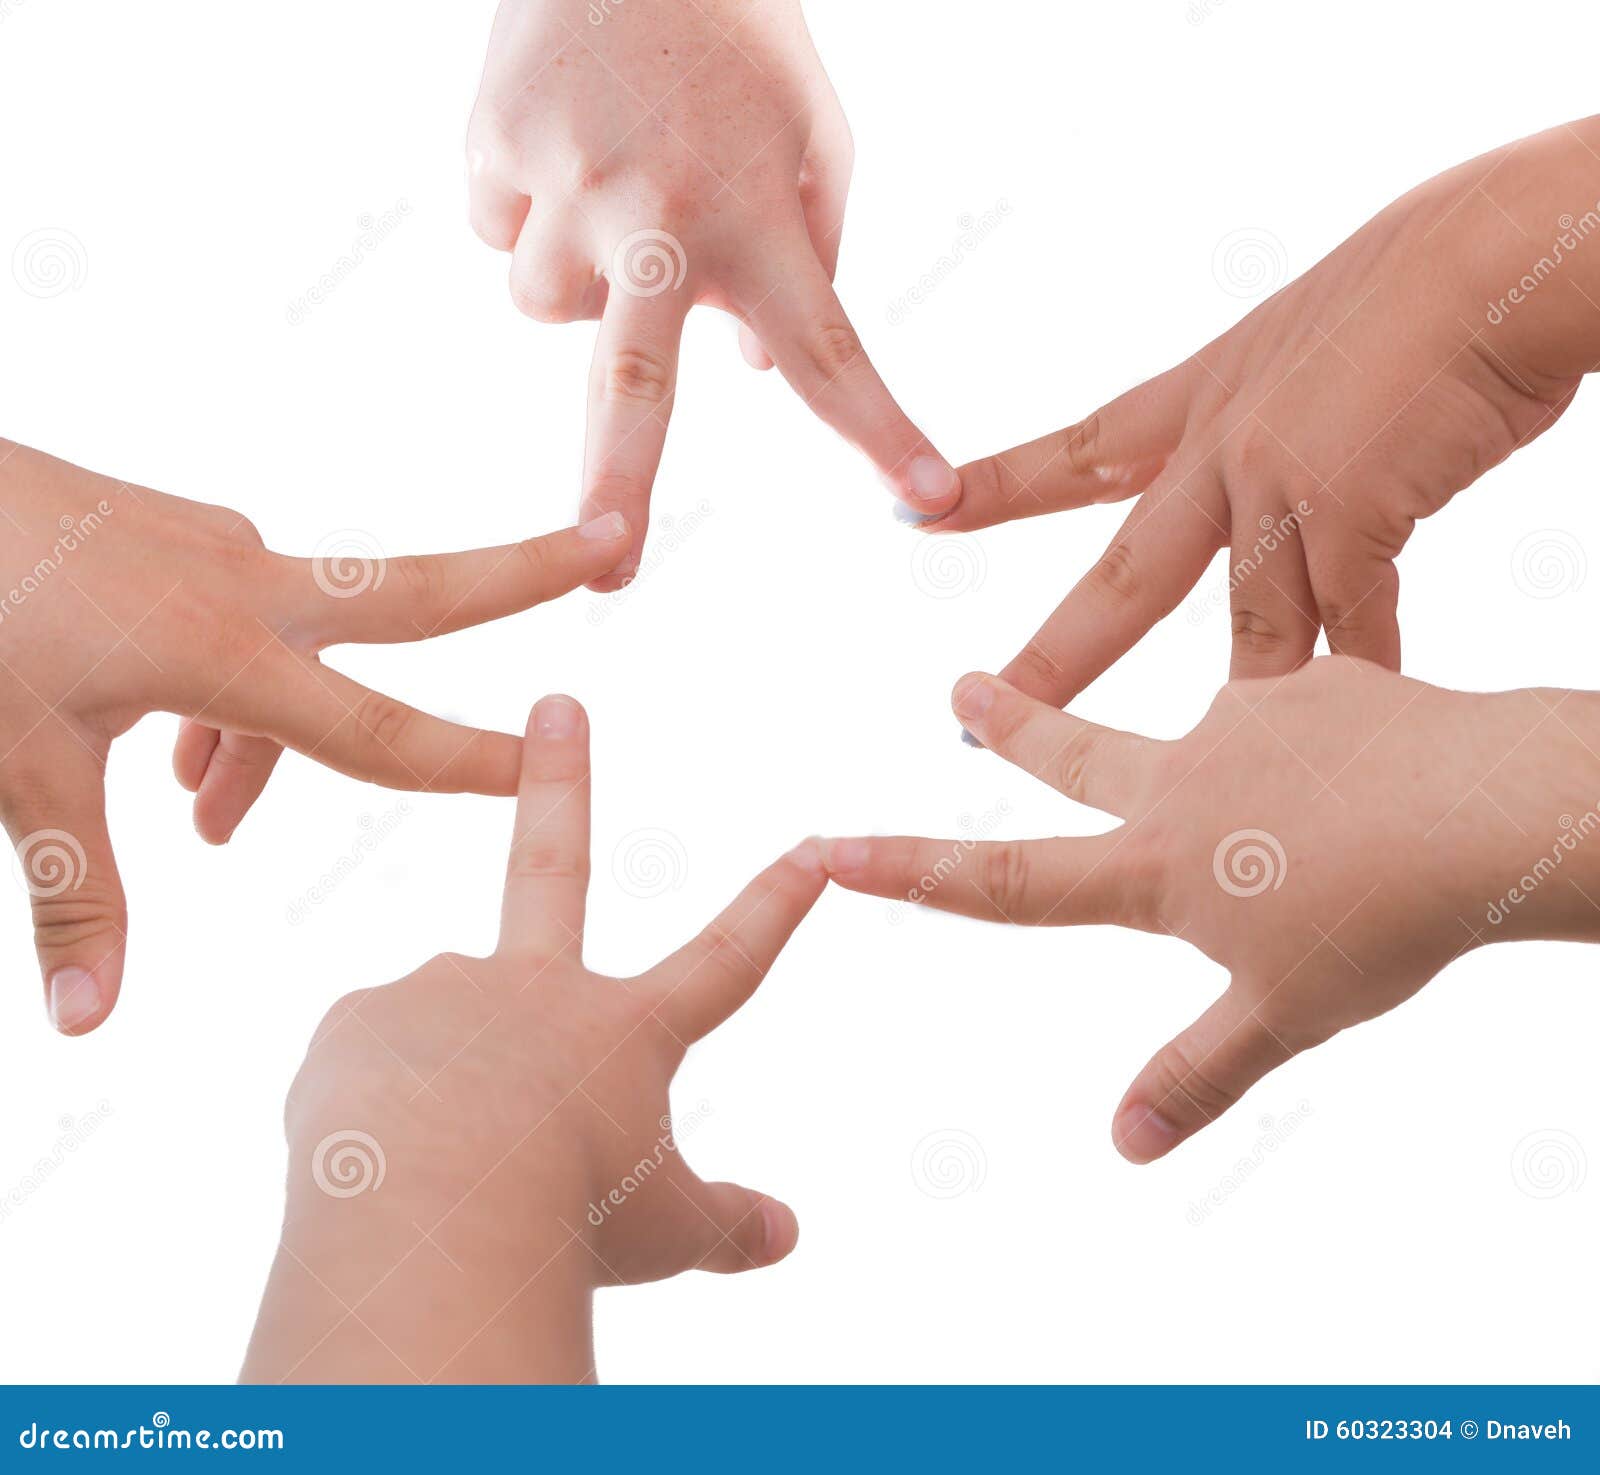 Five Girl Friends Holding Hands in a Star Shape Stock Photo ...